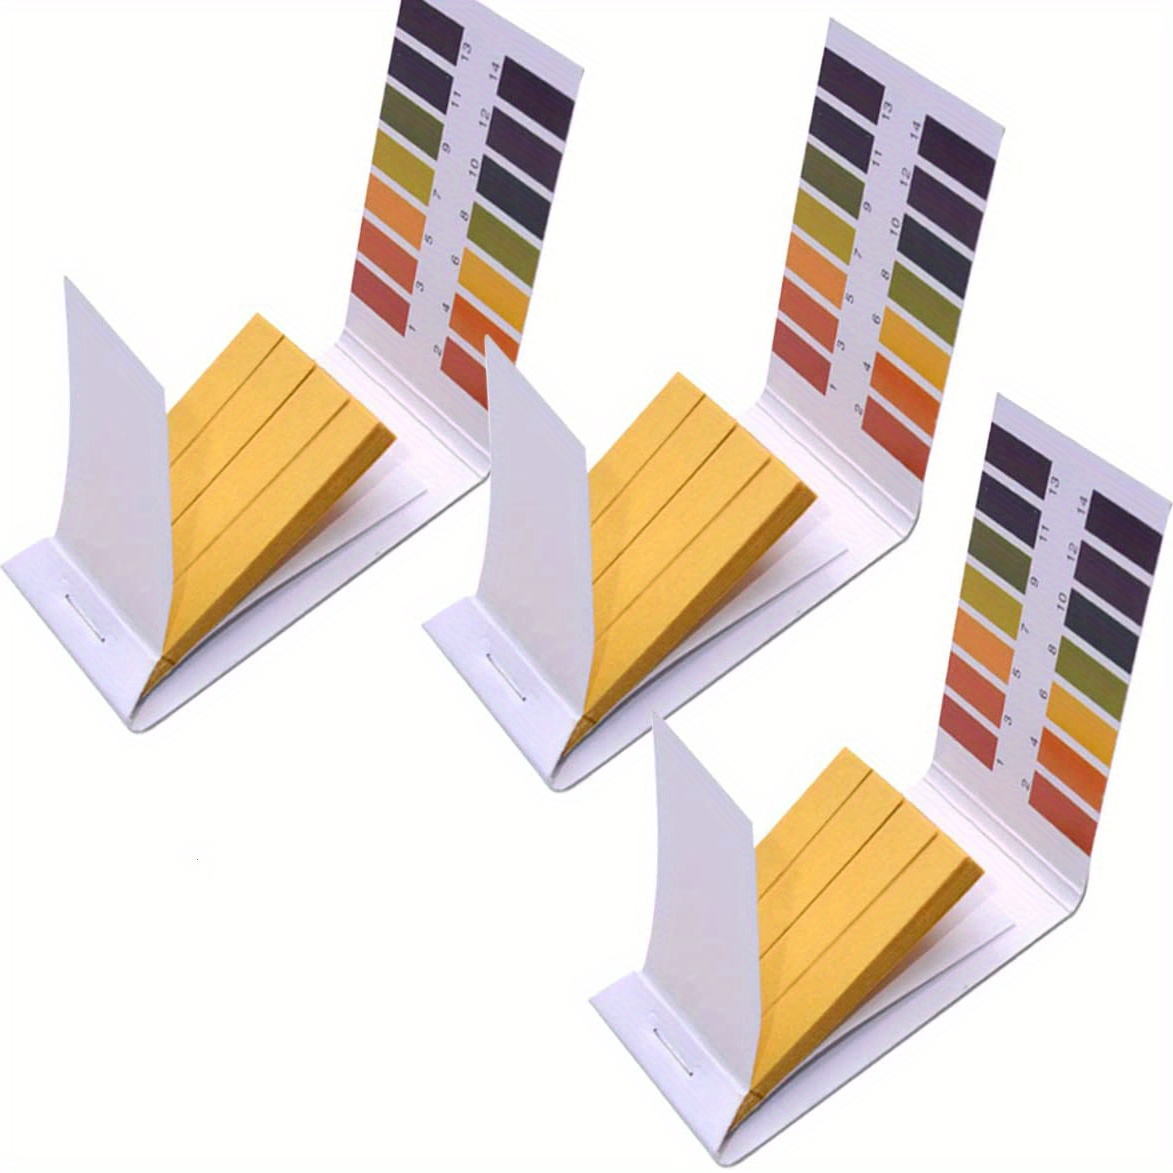 80 Strips/pack 1-14 Ph Litmus Paper Ph Test Strips For Water Cosmetics Soil  Acidity Test Strips With Control Card